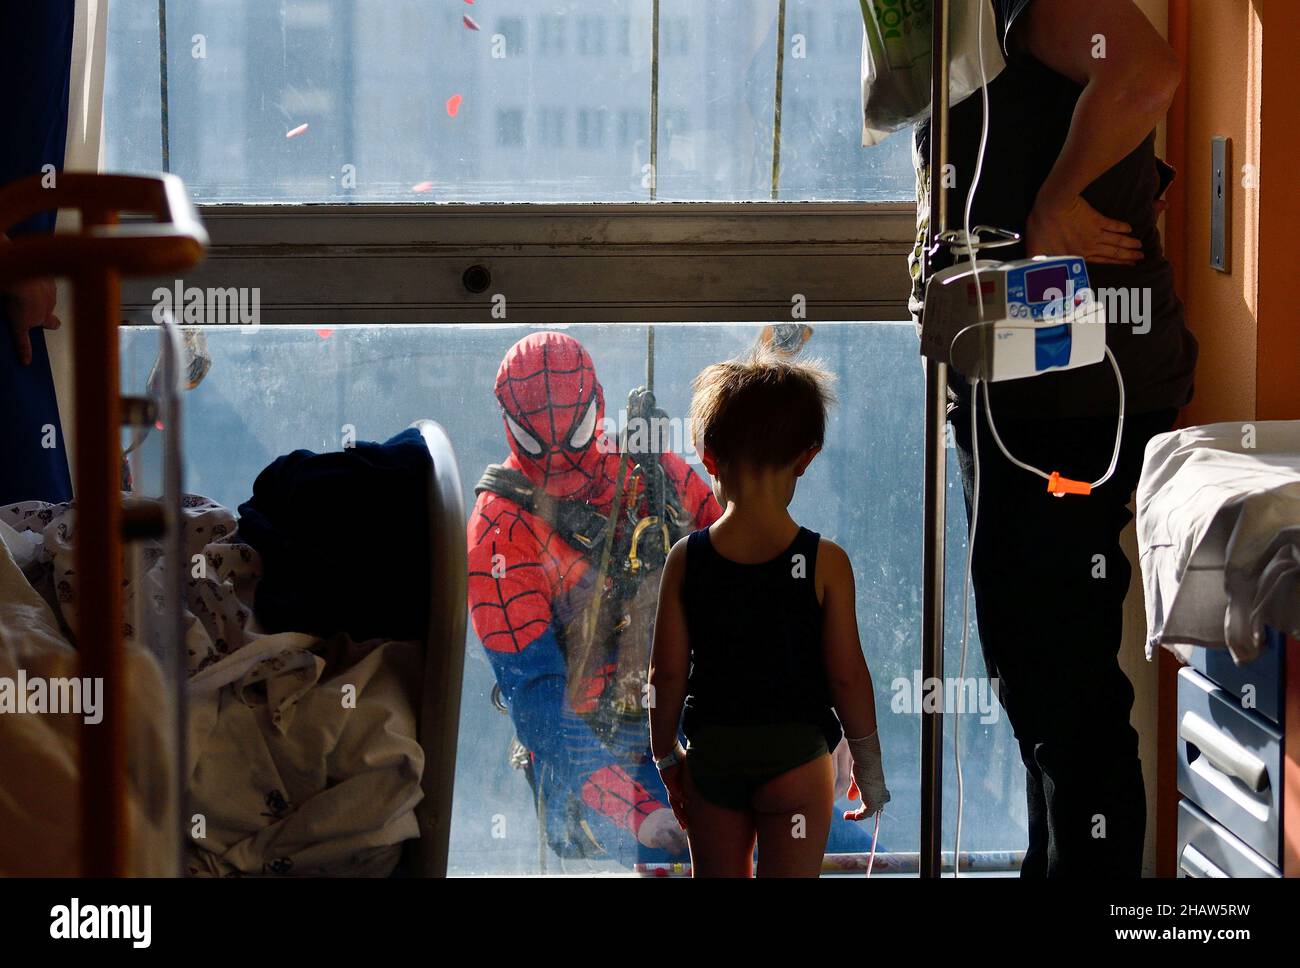 A man dressed as a Spiderman jokes with a child hospitalised in the paediatrics ward of the San Paolo hospital, in Milan, Italy, December 15, 2021. REUTERS/Flavio Lo Scalzo Stock Photo